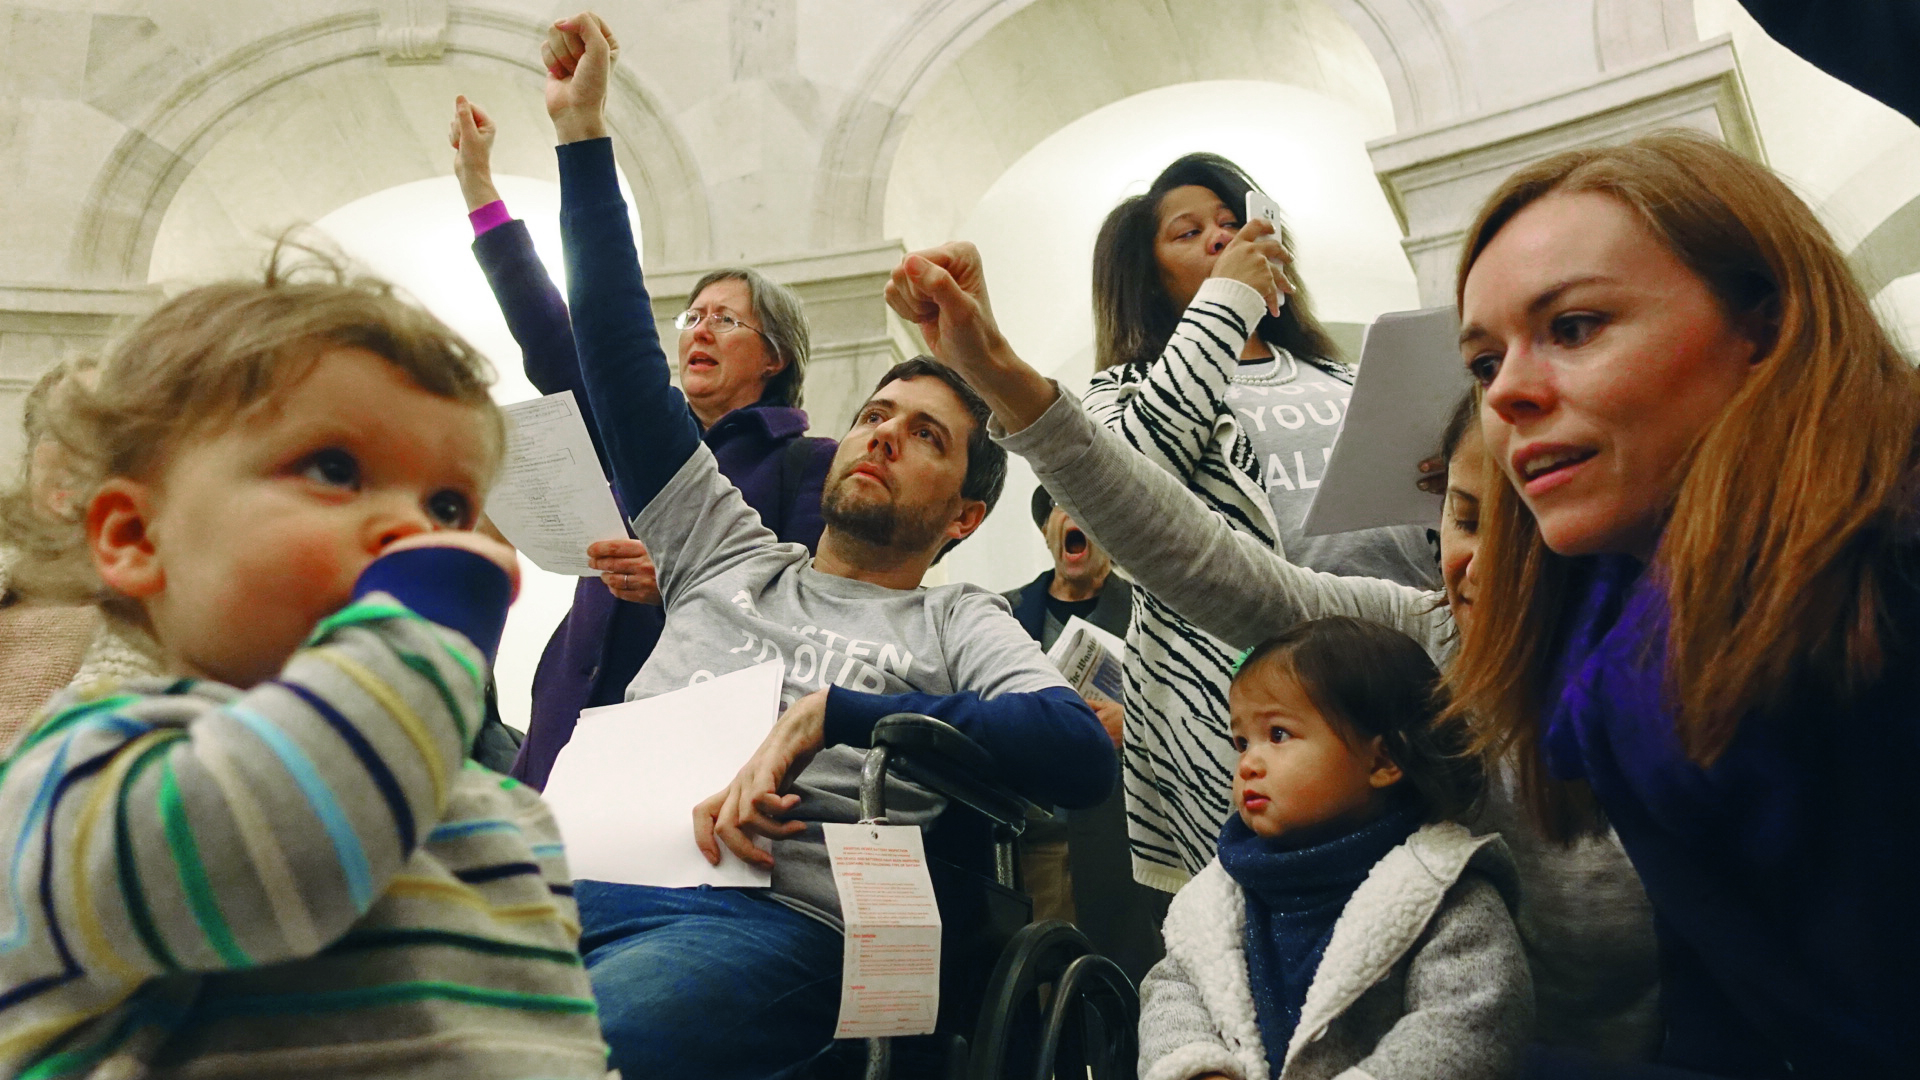 Ady Barkan sings "This Land Is Your Land" in the rotunda of the Russell Senate Office Building with his son Carl, wife Rachael and friends. (Jia-Ching Chen)